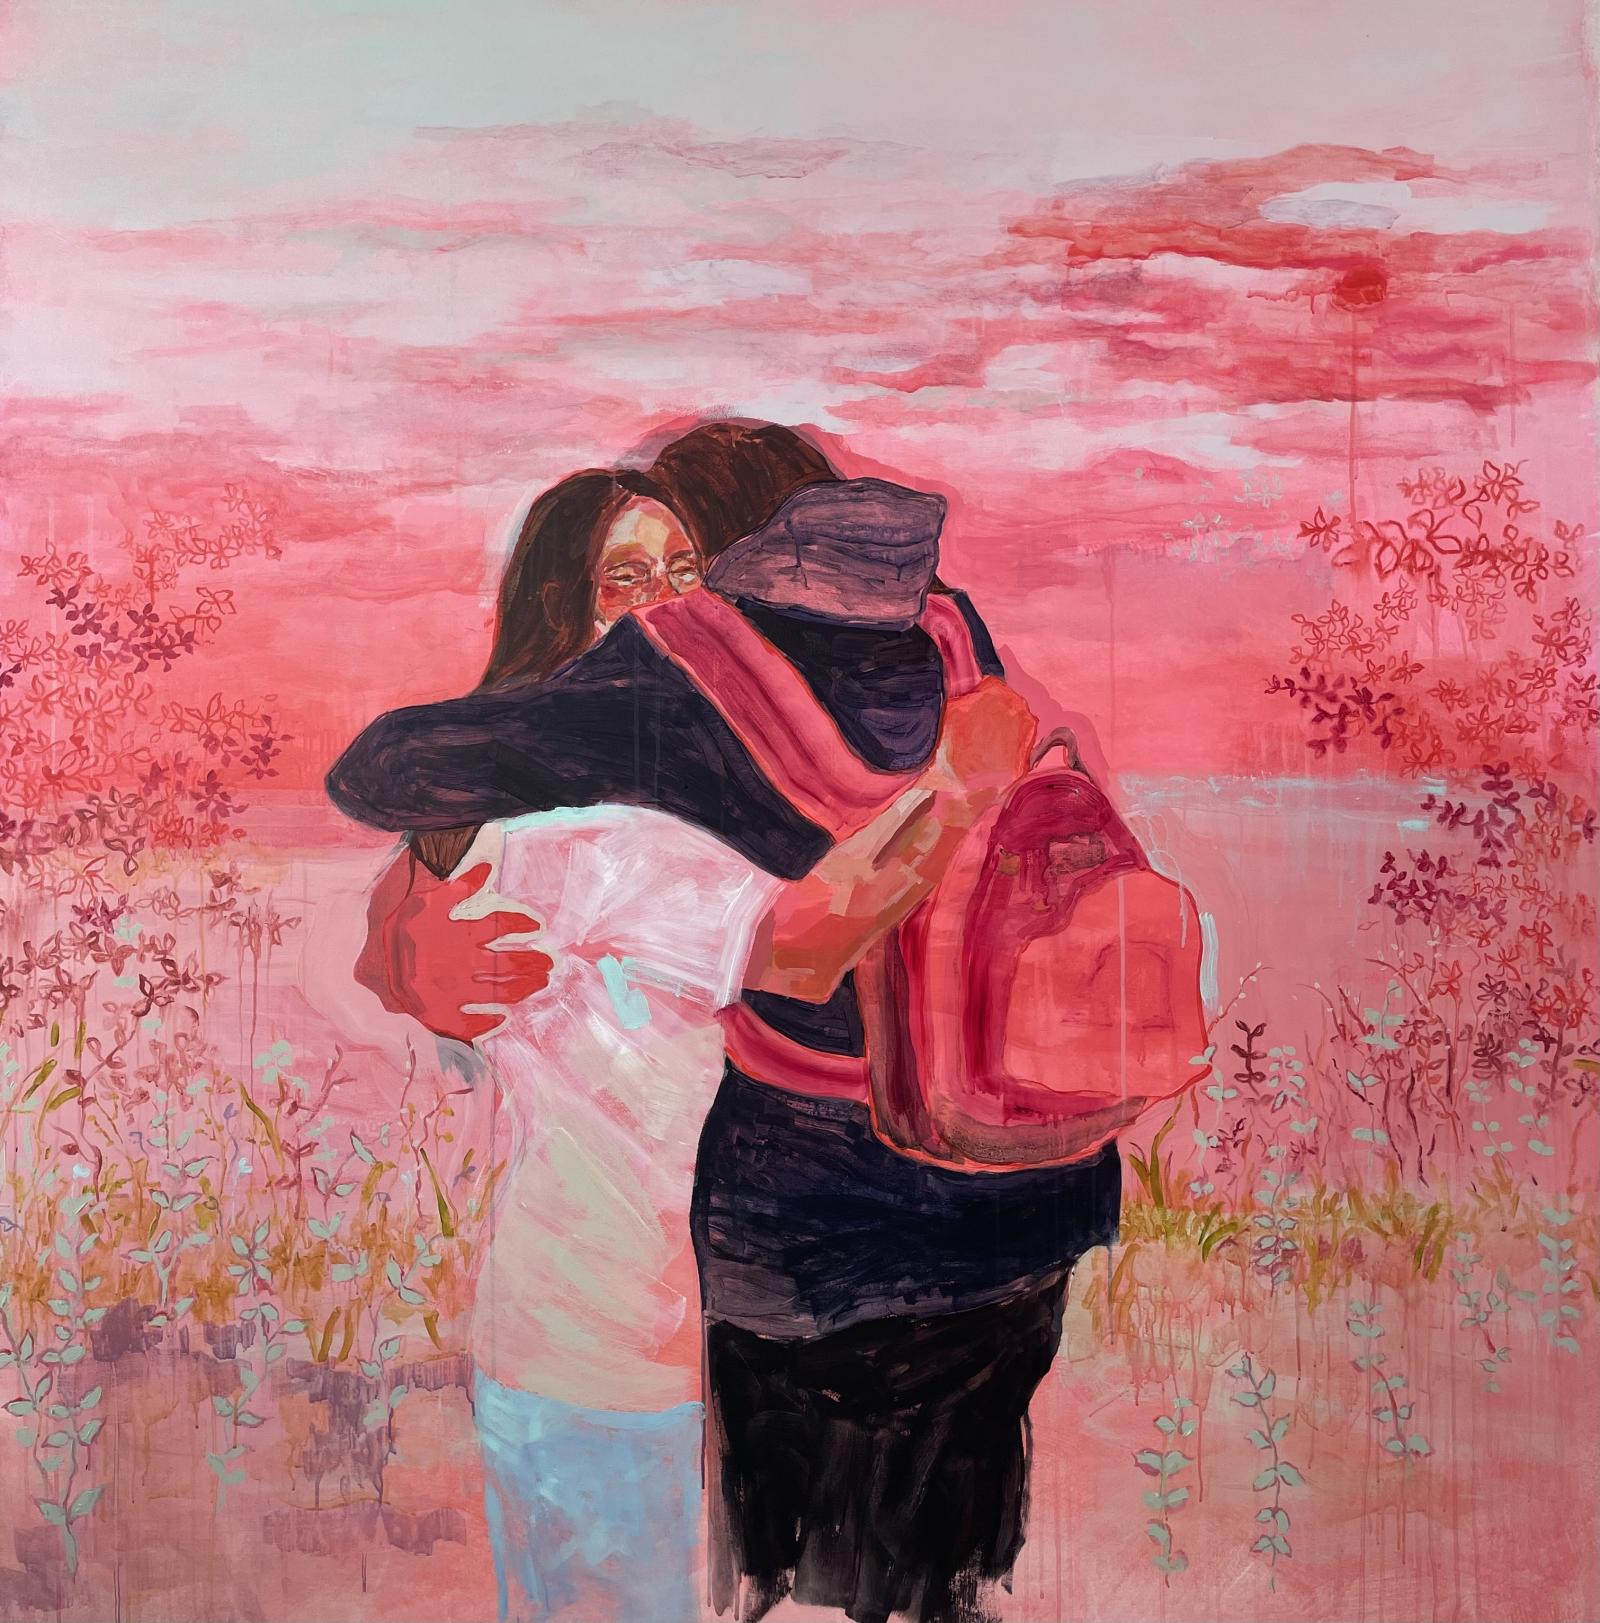 A painting of two people embracing. The figure with their back towards the viewer has a pink backpack on, they are taller than the person facing towards us. The figure facing towards teh view has dark hair and a white shirt. A red hand wraps around them lovingly. The background is slightly abstract but suggests clouds and prairie landscapes. It is mostly pink and red. 